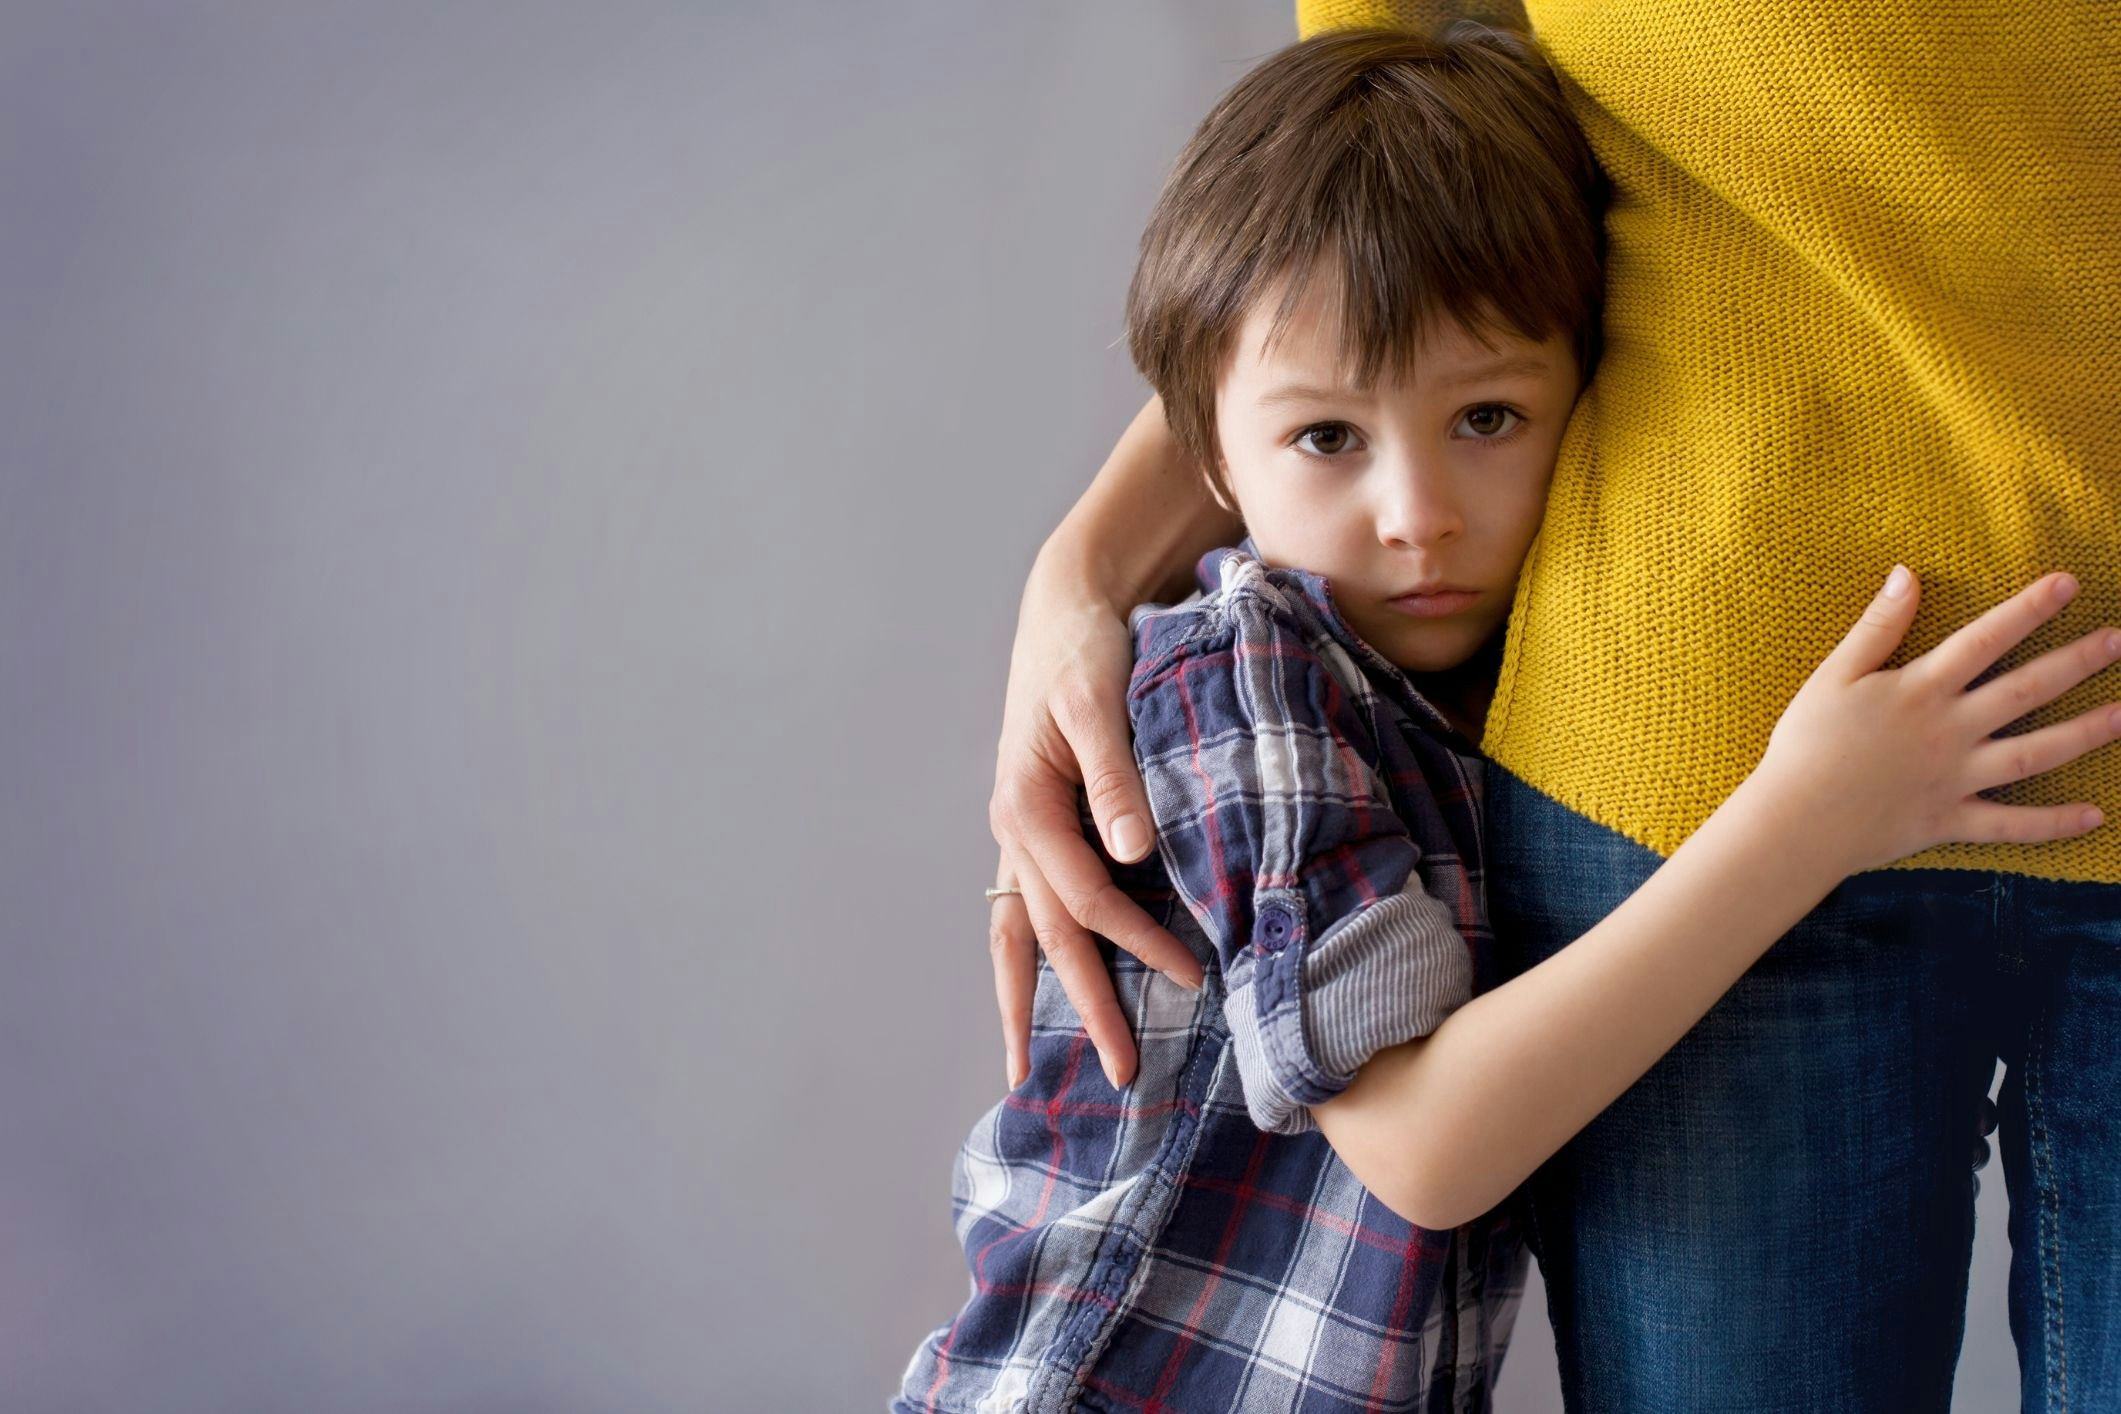 While children may experience anxiety occasionally, some children find it much more difficult to manage, with their daily functioning negatively affected. Thankfully, there are treatments which aim to support these children.
[Source: Shutterstock]
